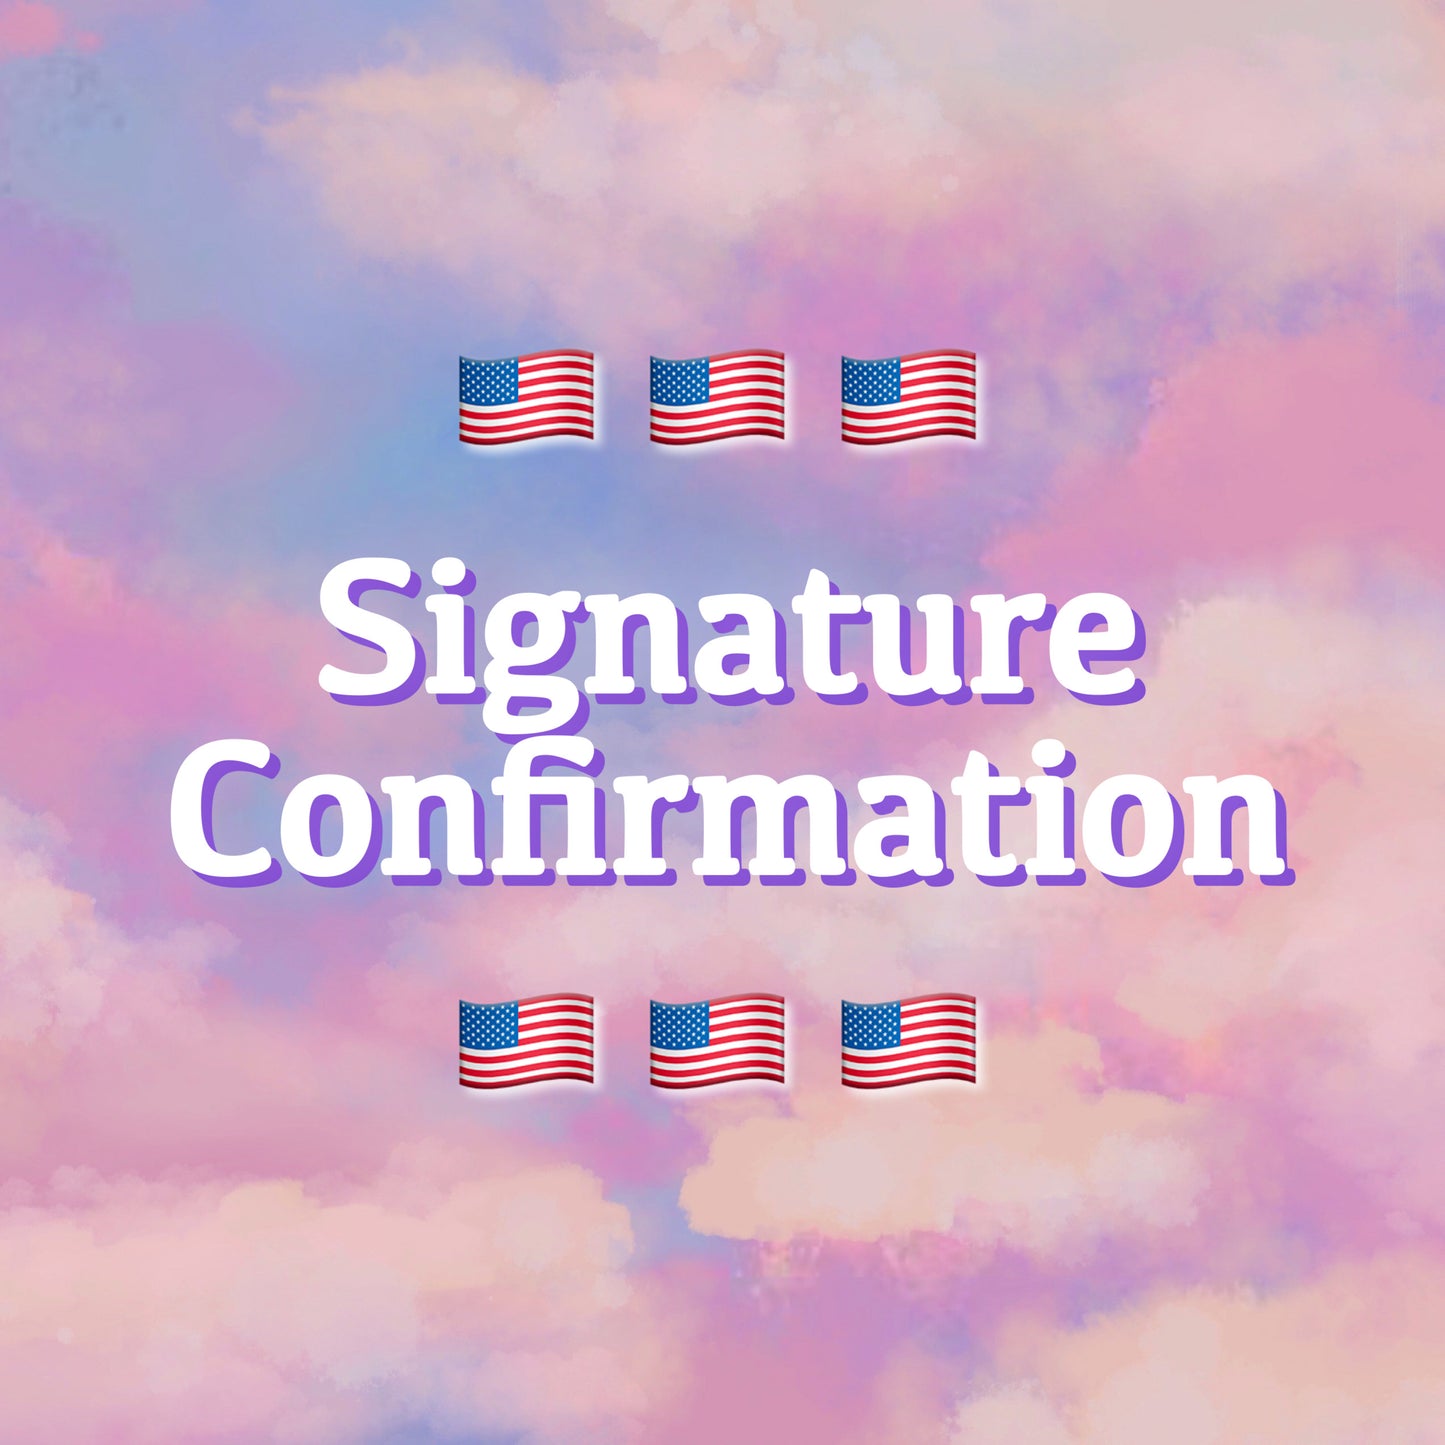 USA ONLY - Signature Confirmation